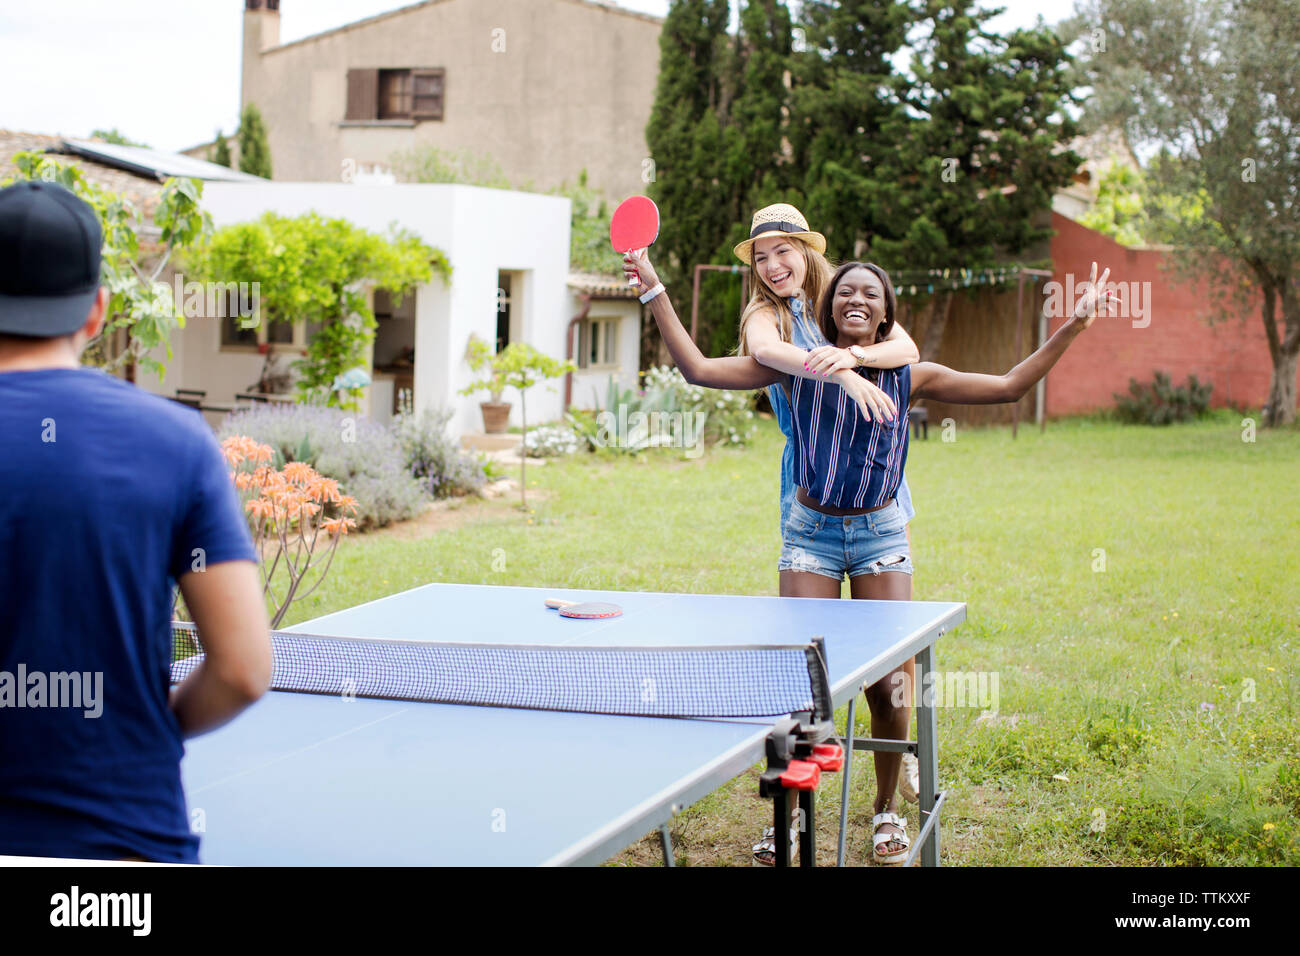 Cheerful women playing table tennis with male friend at yard Stock Photo